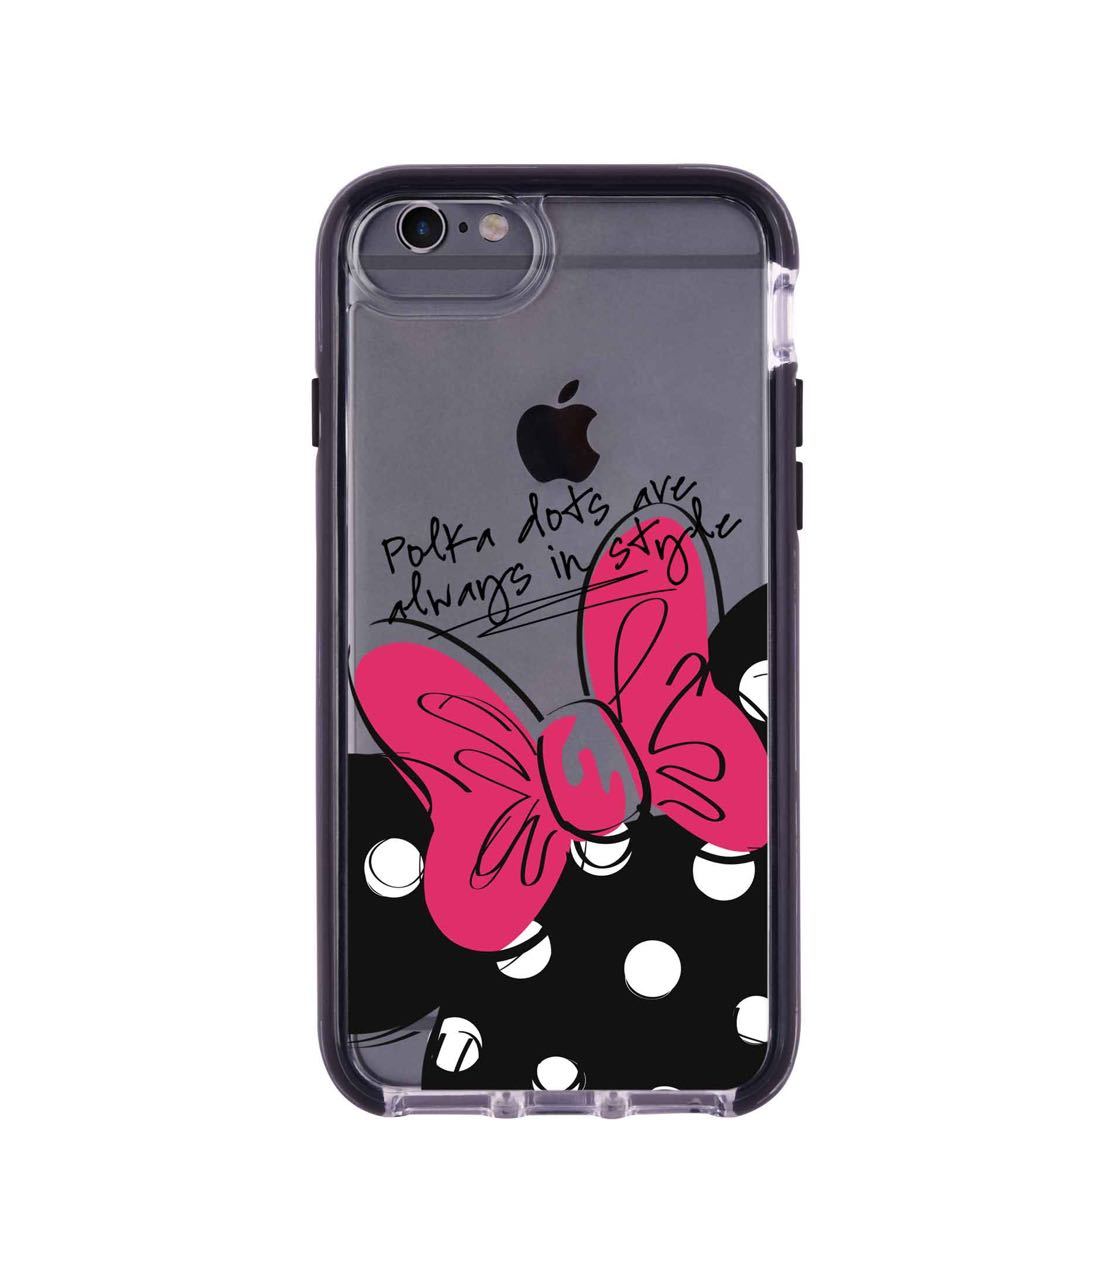 Polka Minnie - Extreme Phone Case for iPhone 6S Plus